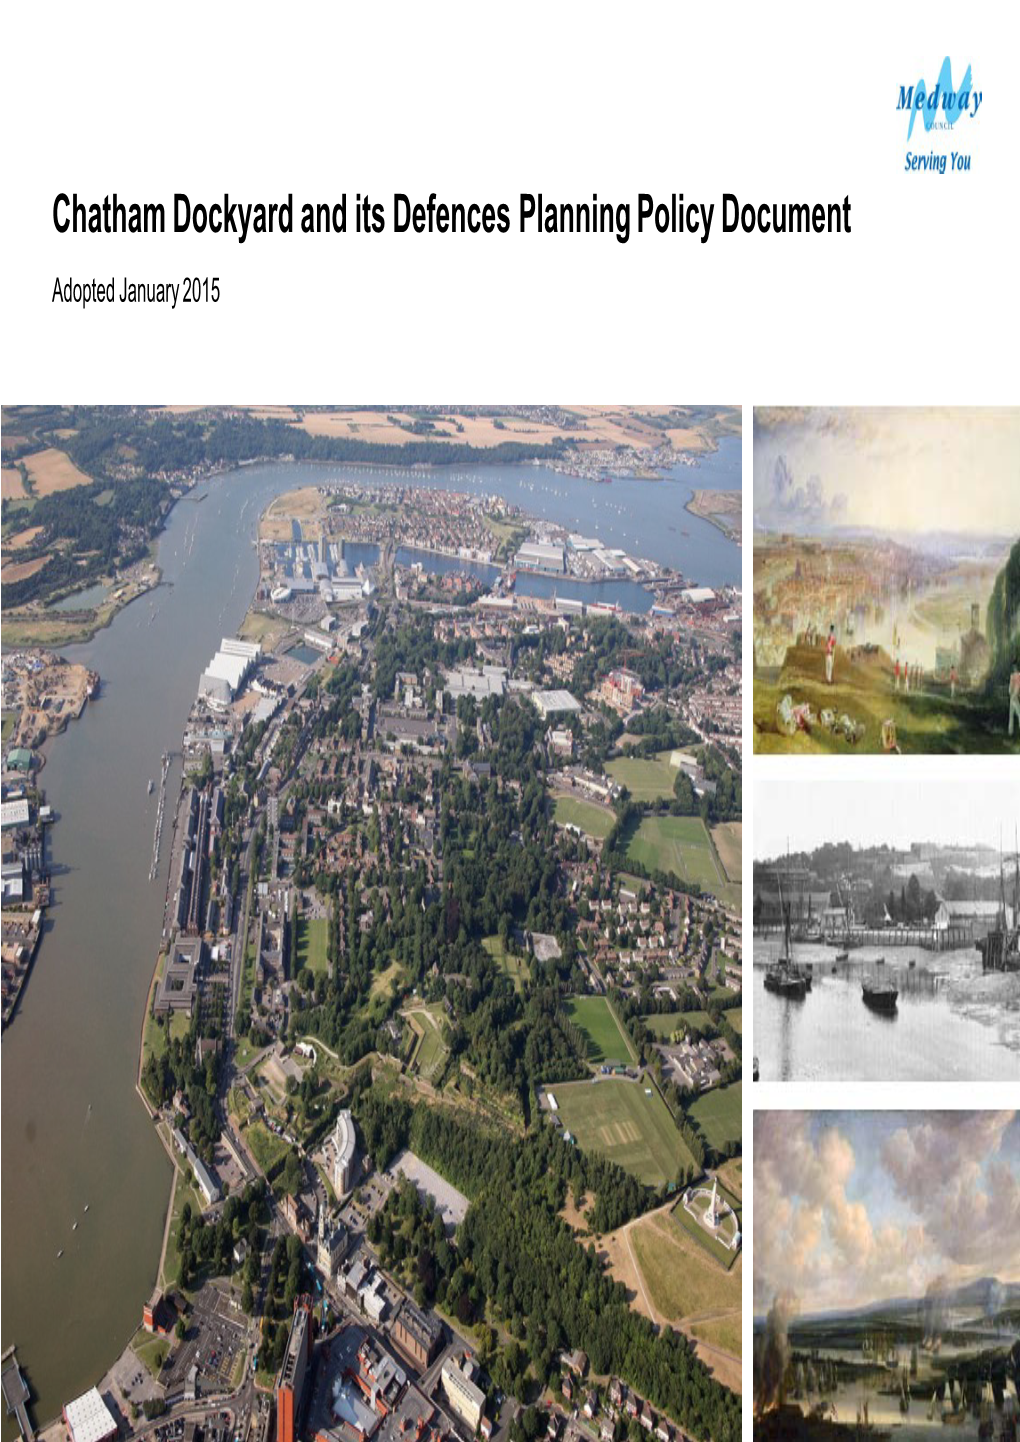 Download Chatham Dockyard and Its Defences Planning Document